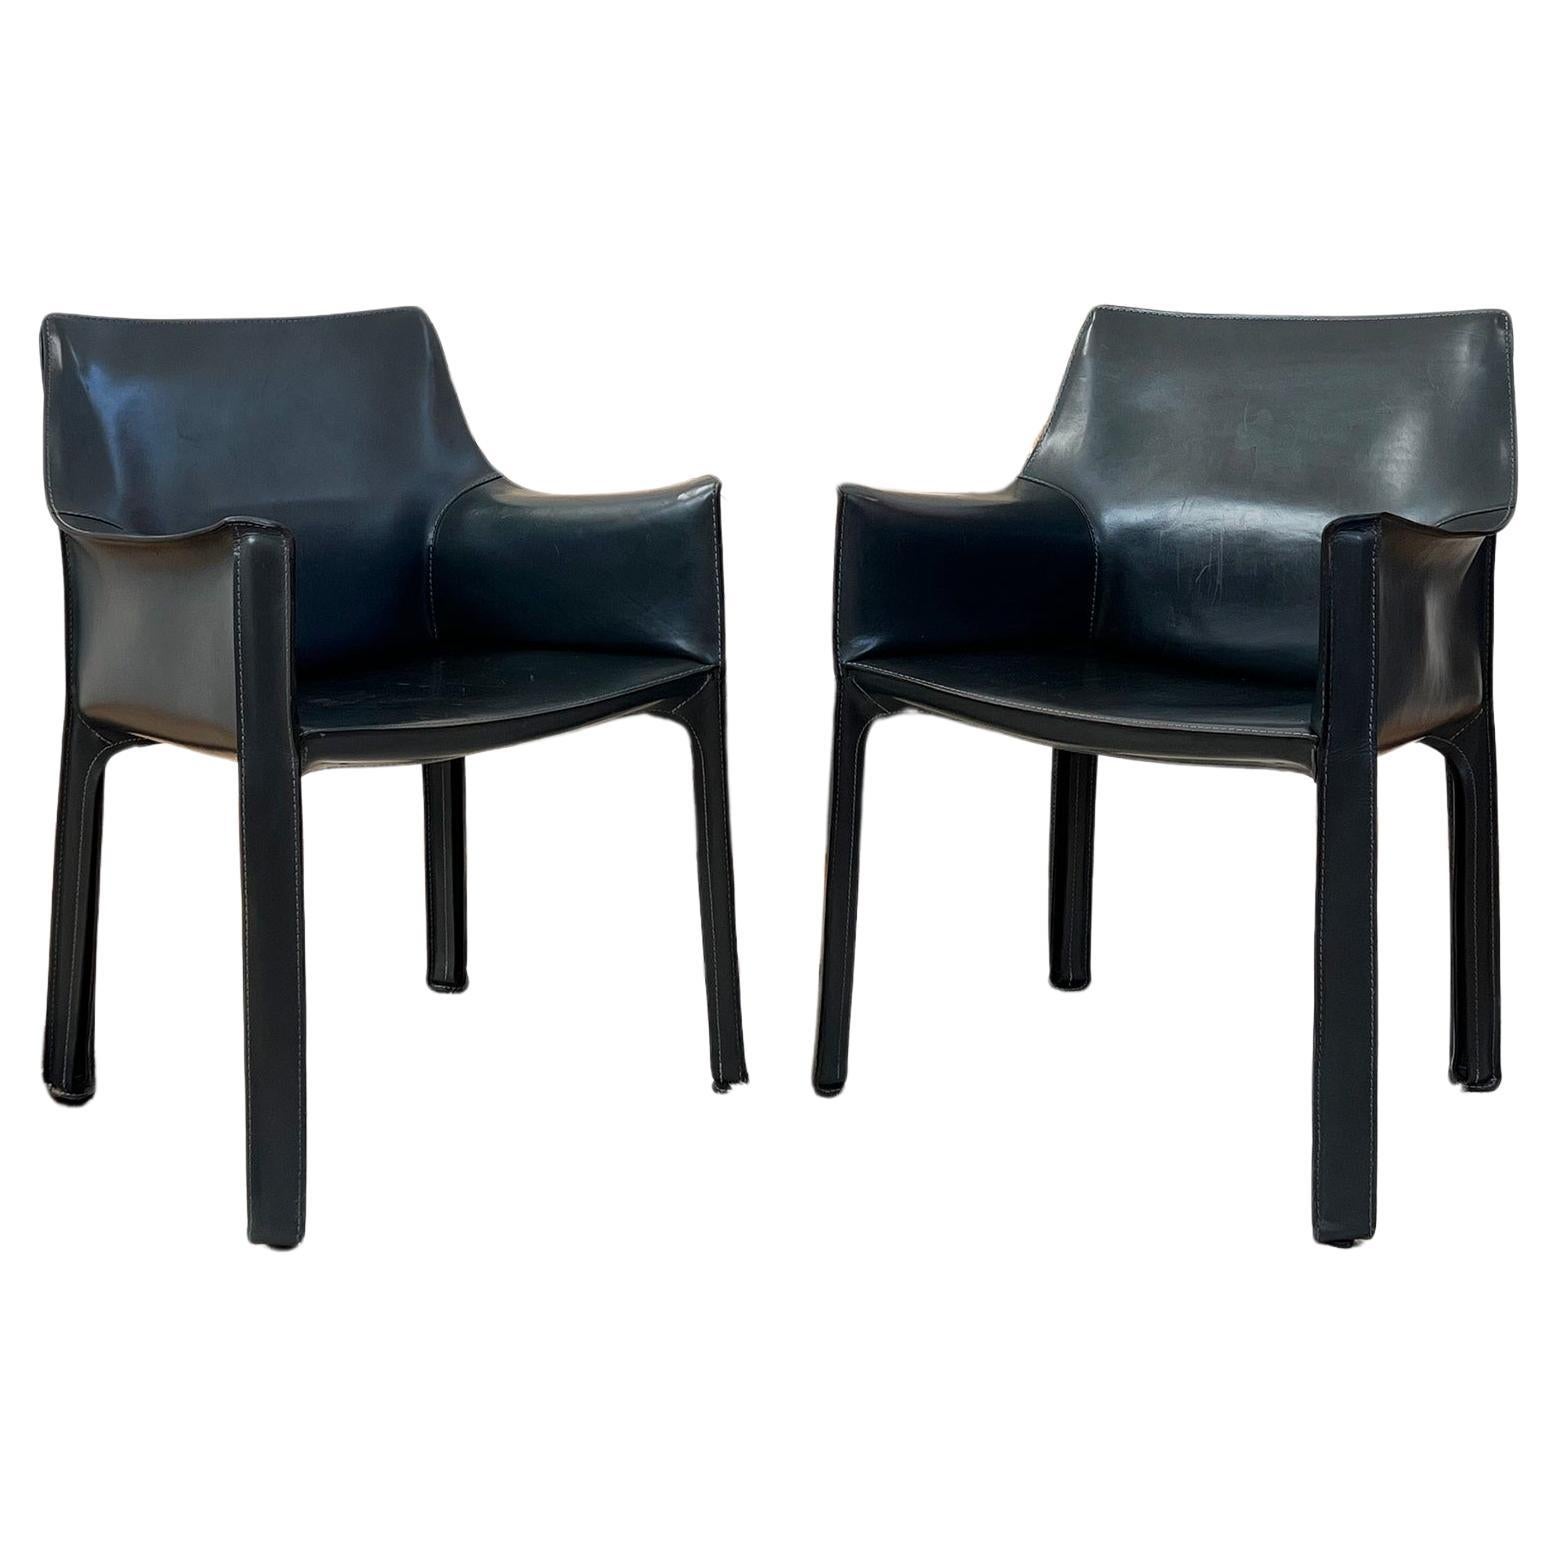 Cassina Cab 414 Armchairs PAIR by Mario Bellini in Dark Grey Matte Black Leather For Sale